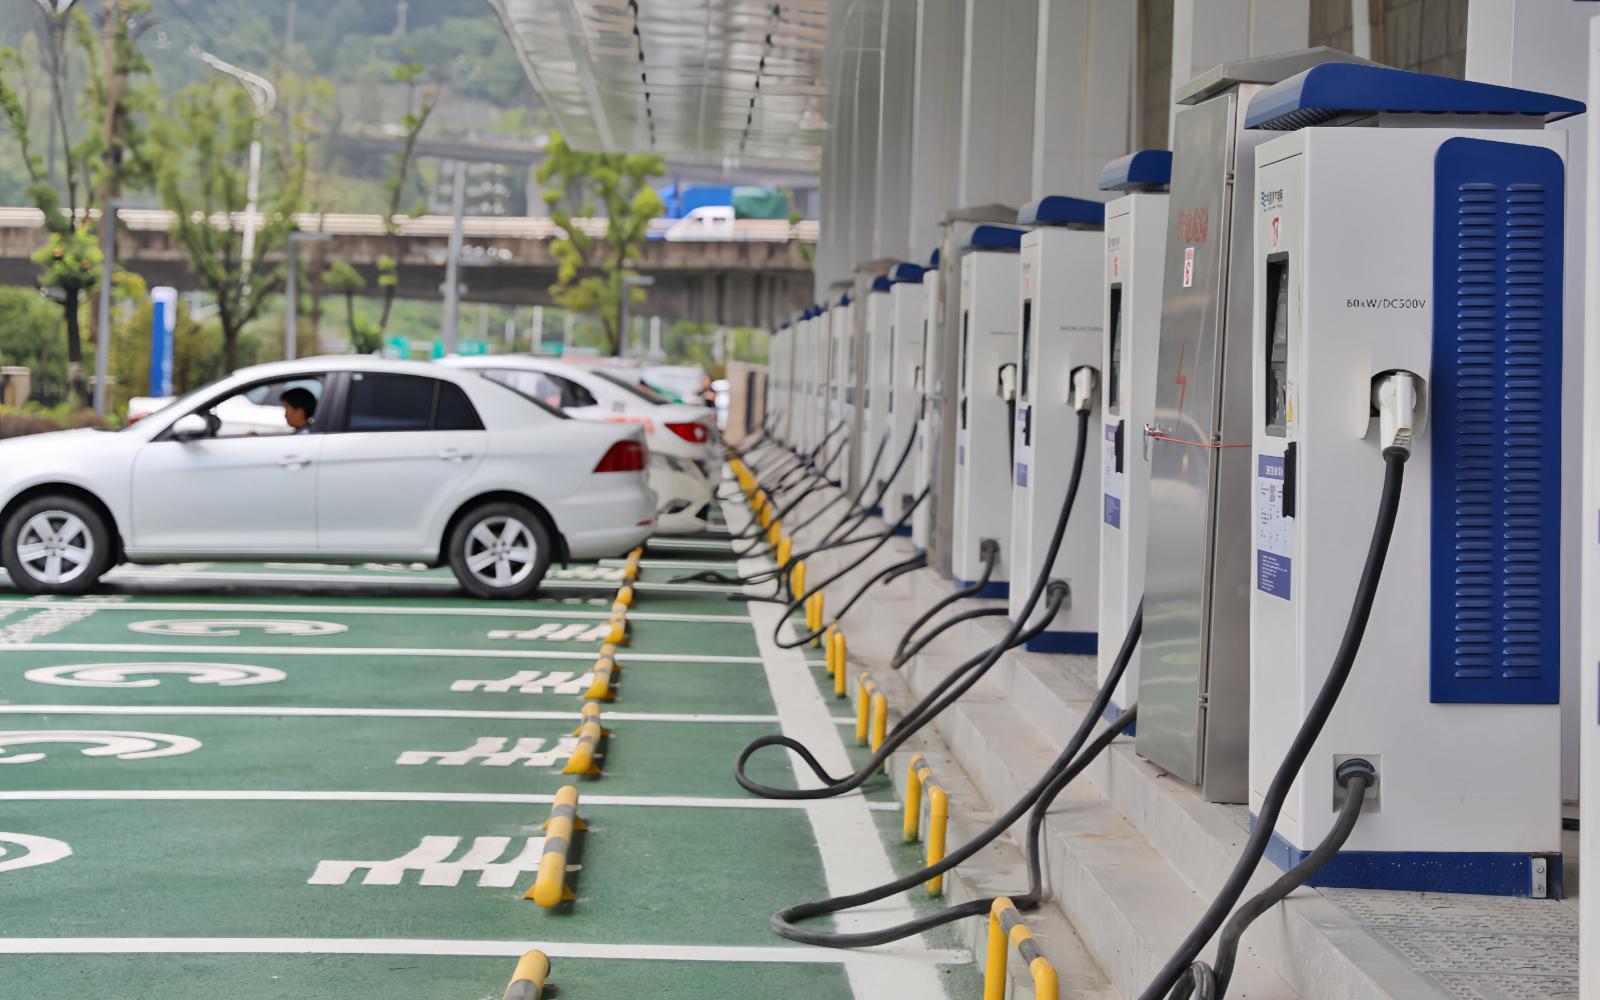 ev charging stations in china